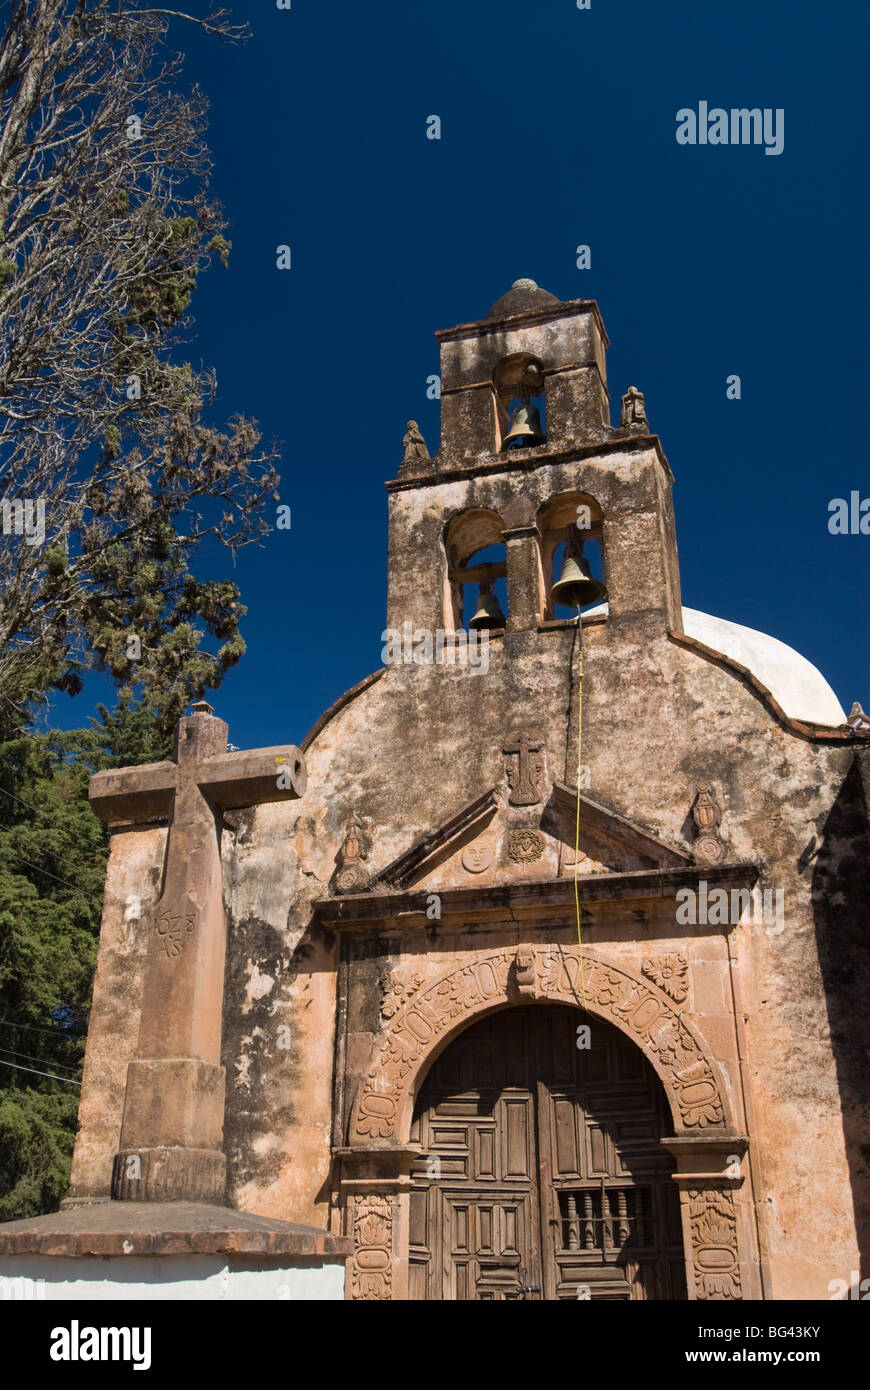 El Humilladero (The Place of Humiliation), oldest church in Patzcuaro, built early 17th century, Patzcuaro, Michoacan, Mexico Stock Photo